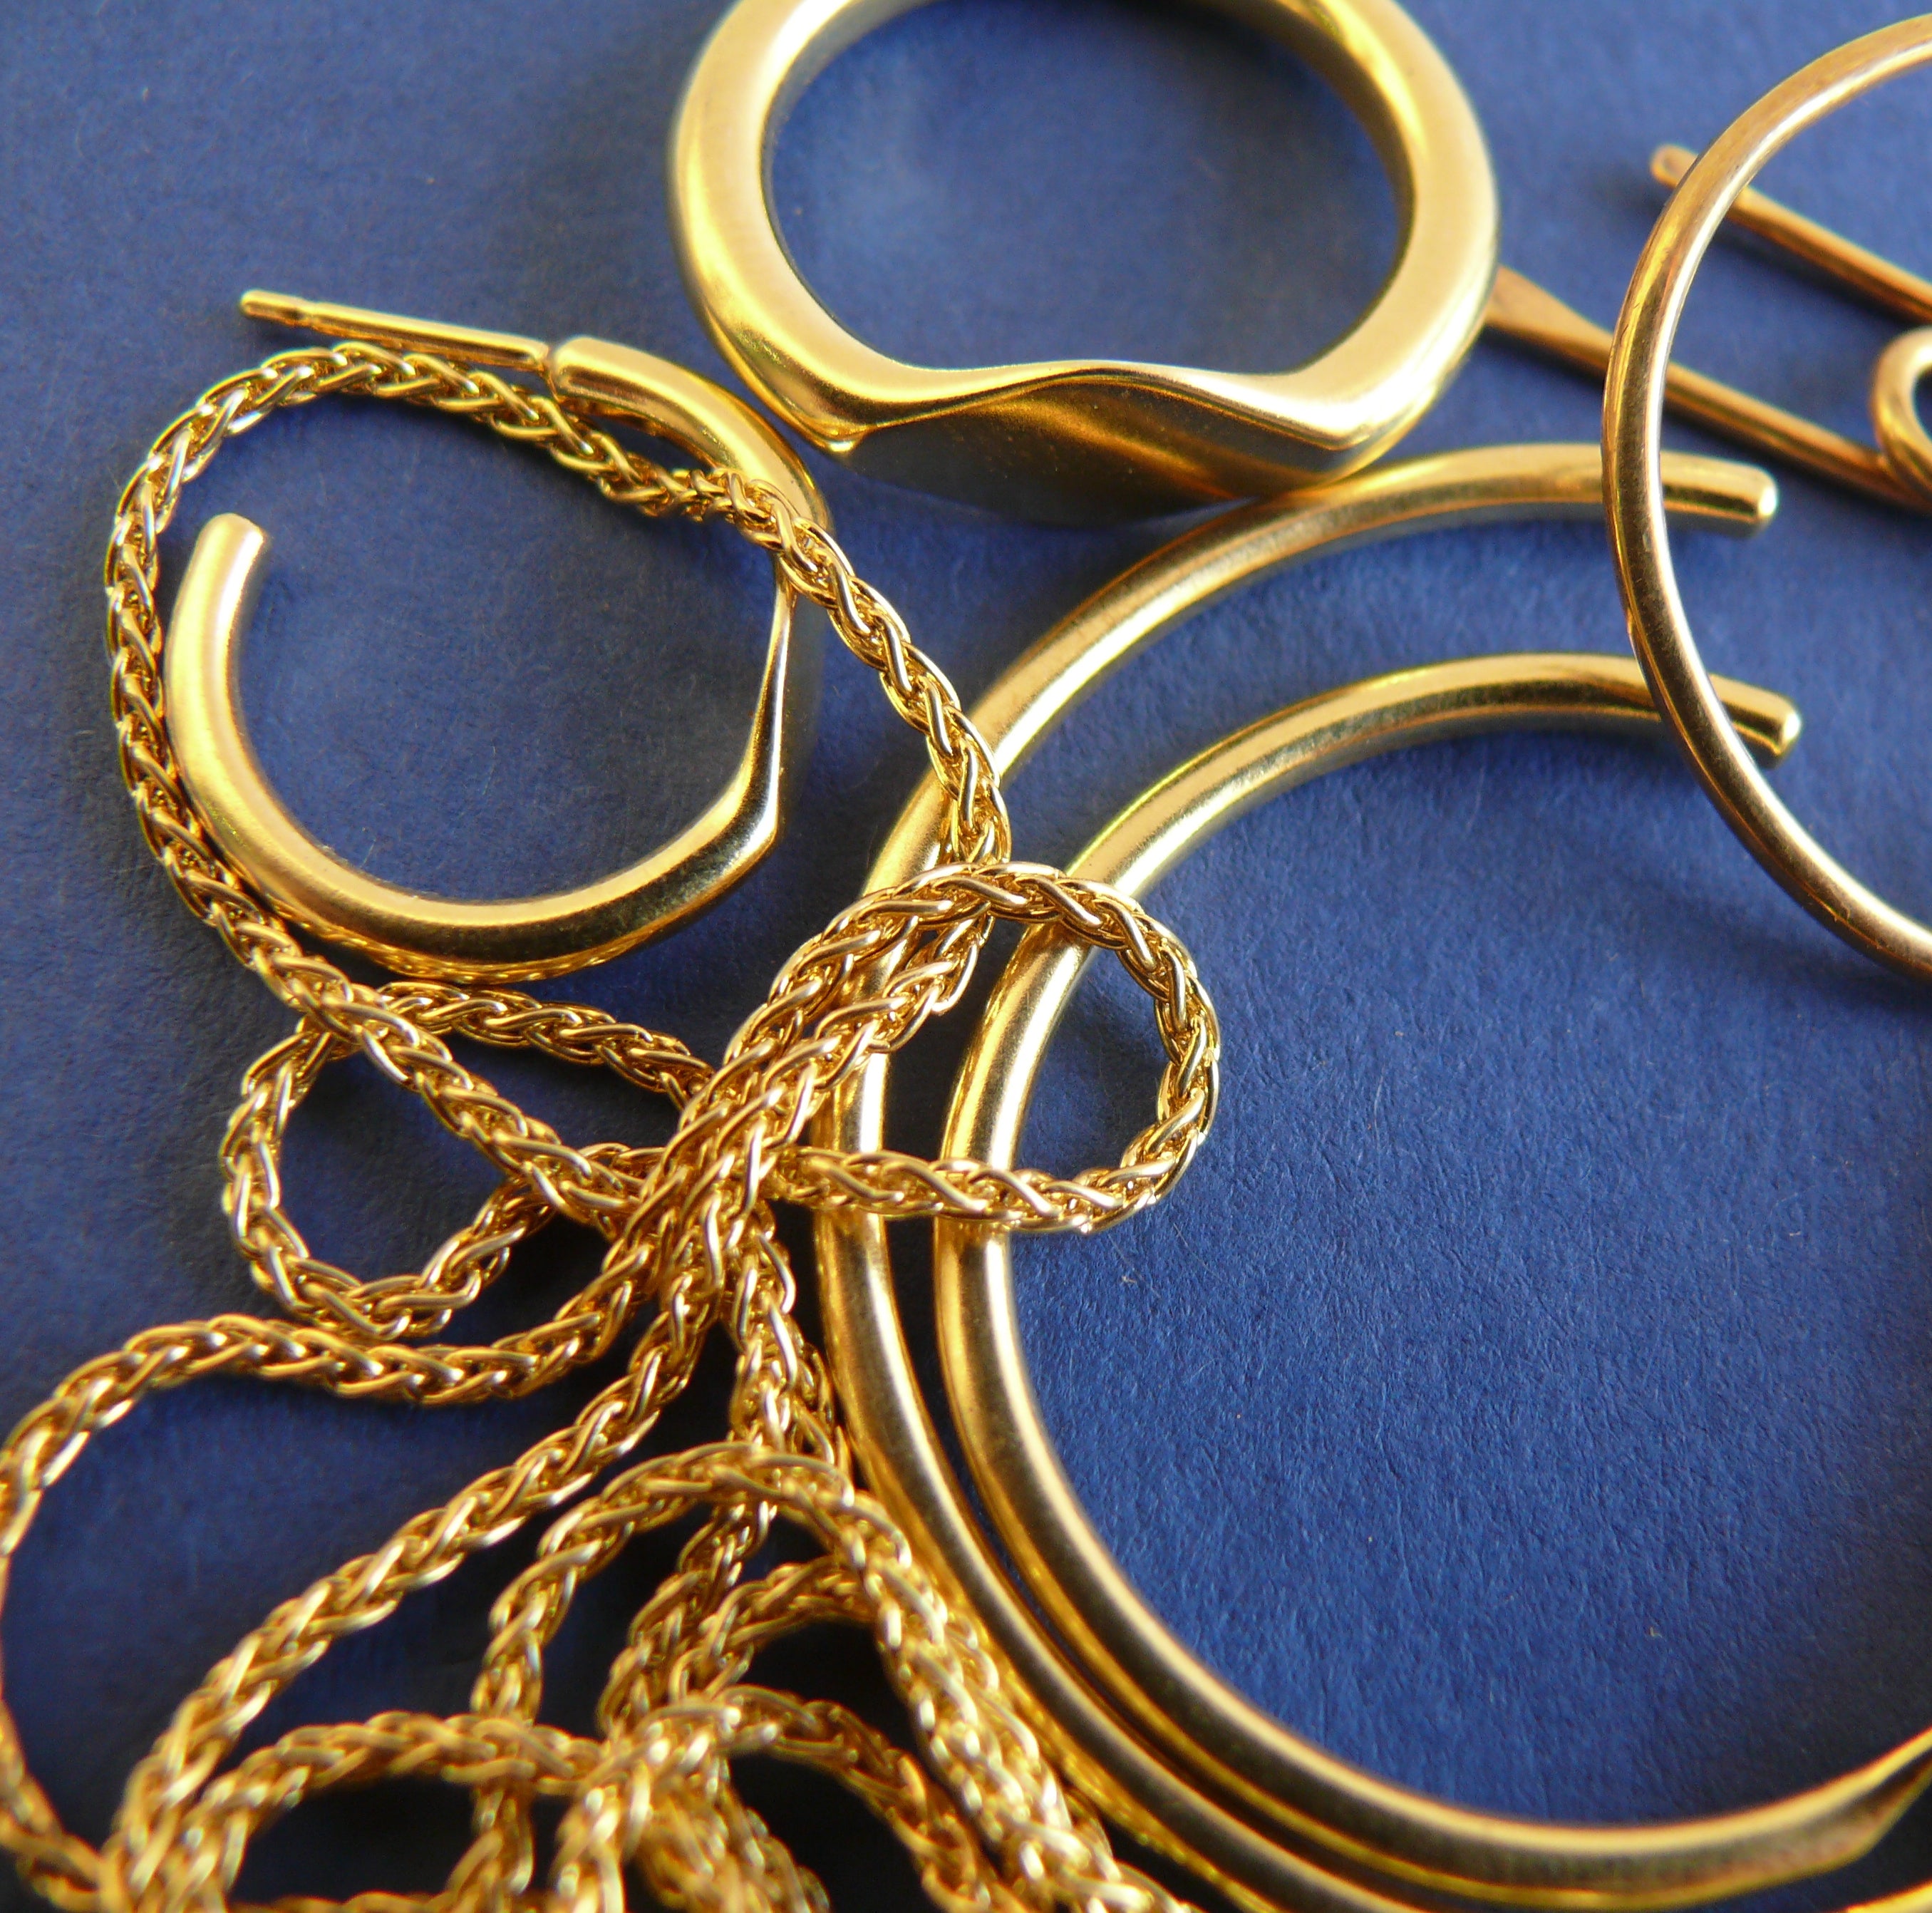 Made Line Jewelry is made with recycled and fairmined gold and silver.